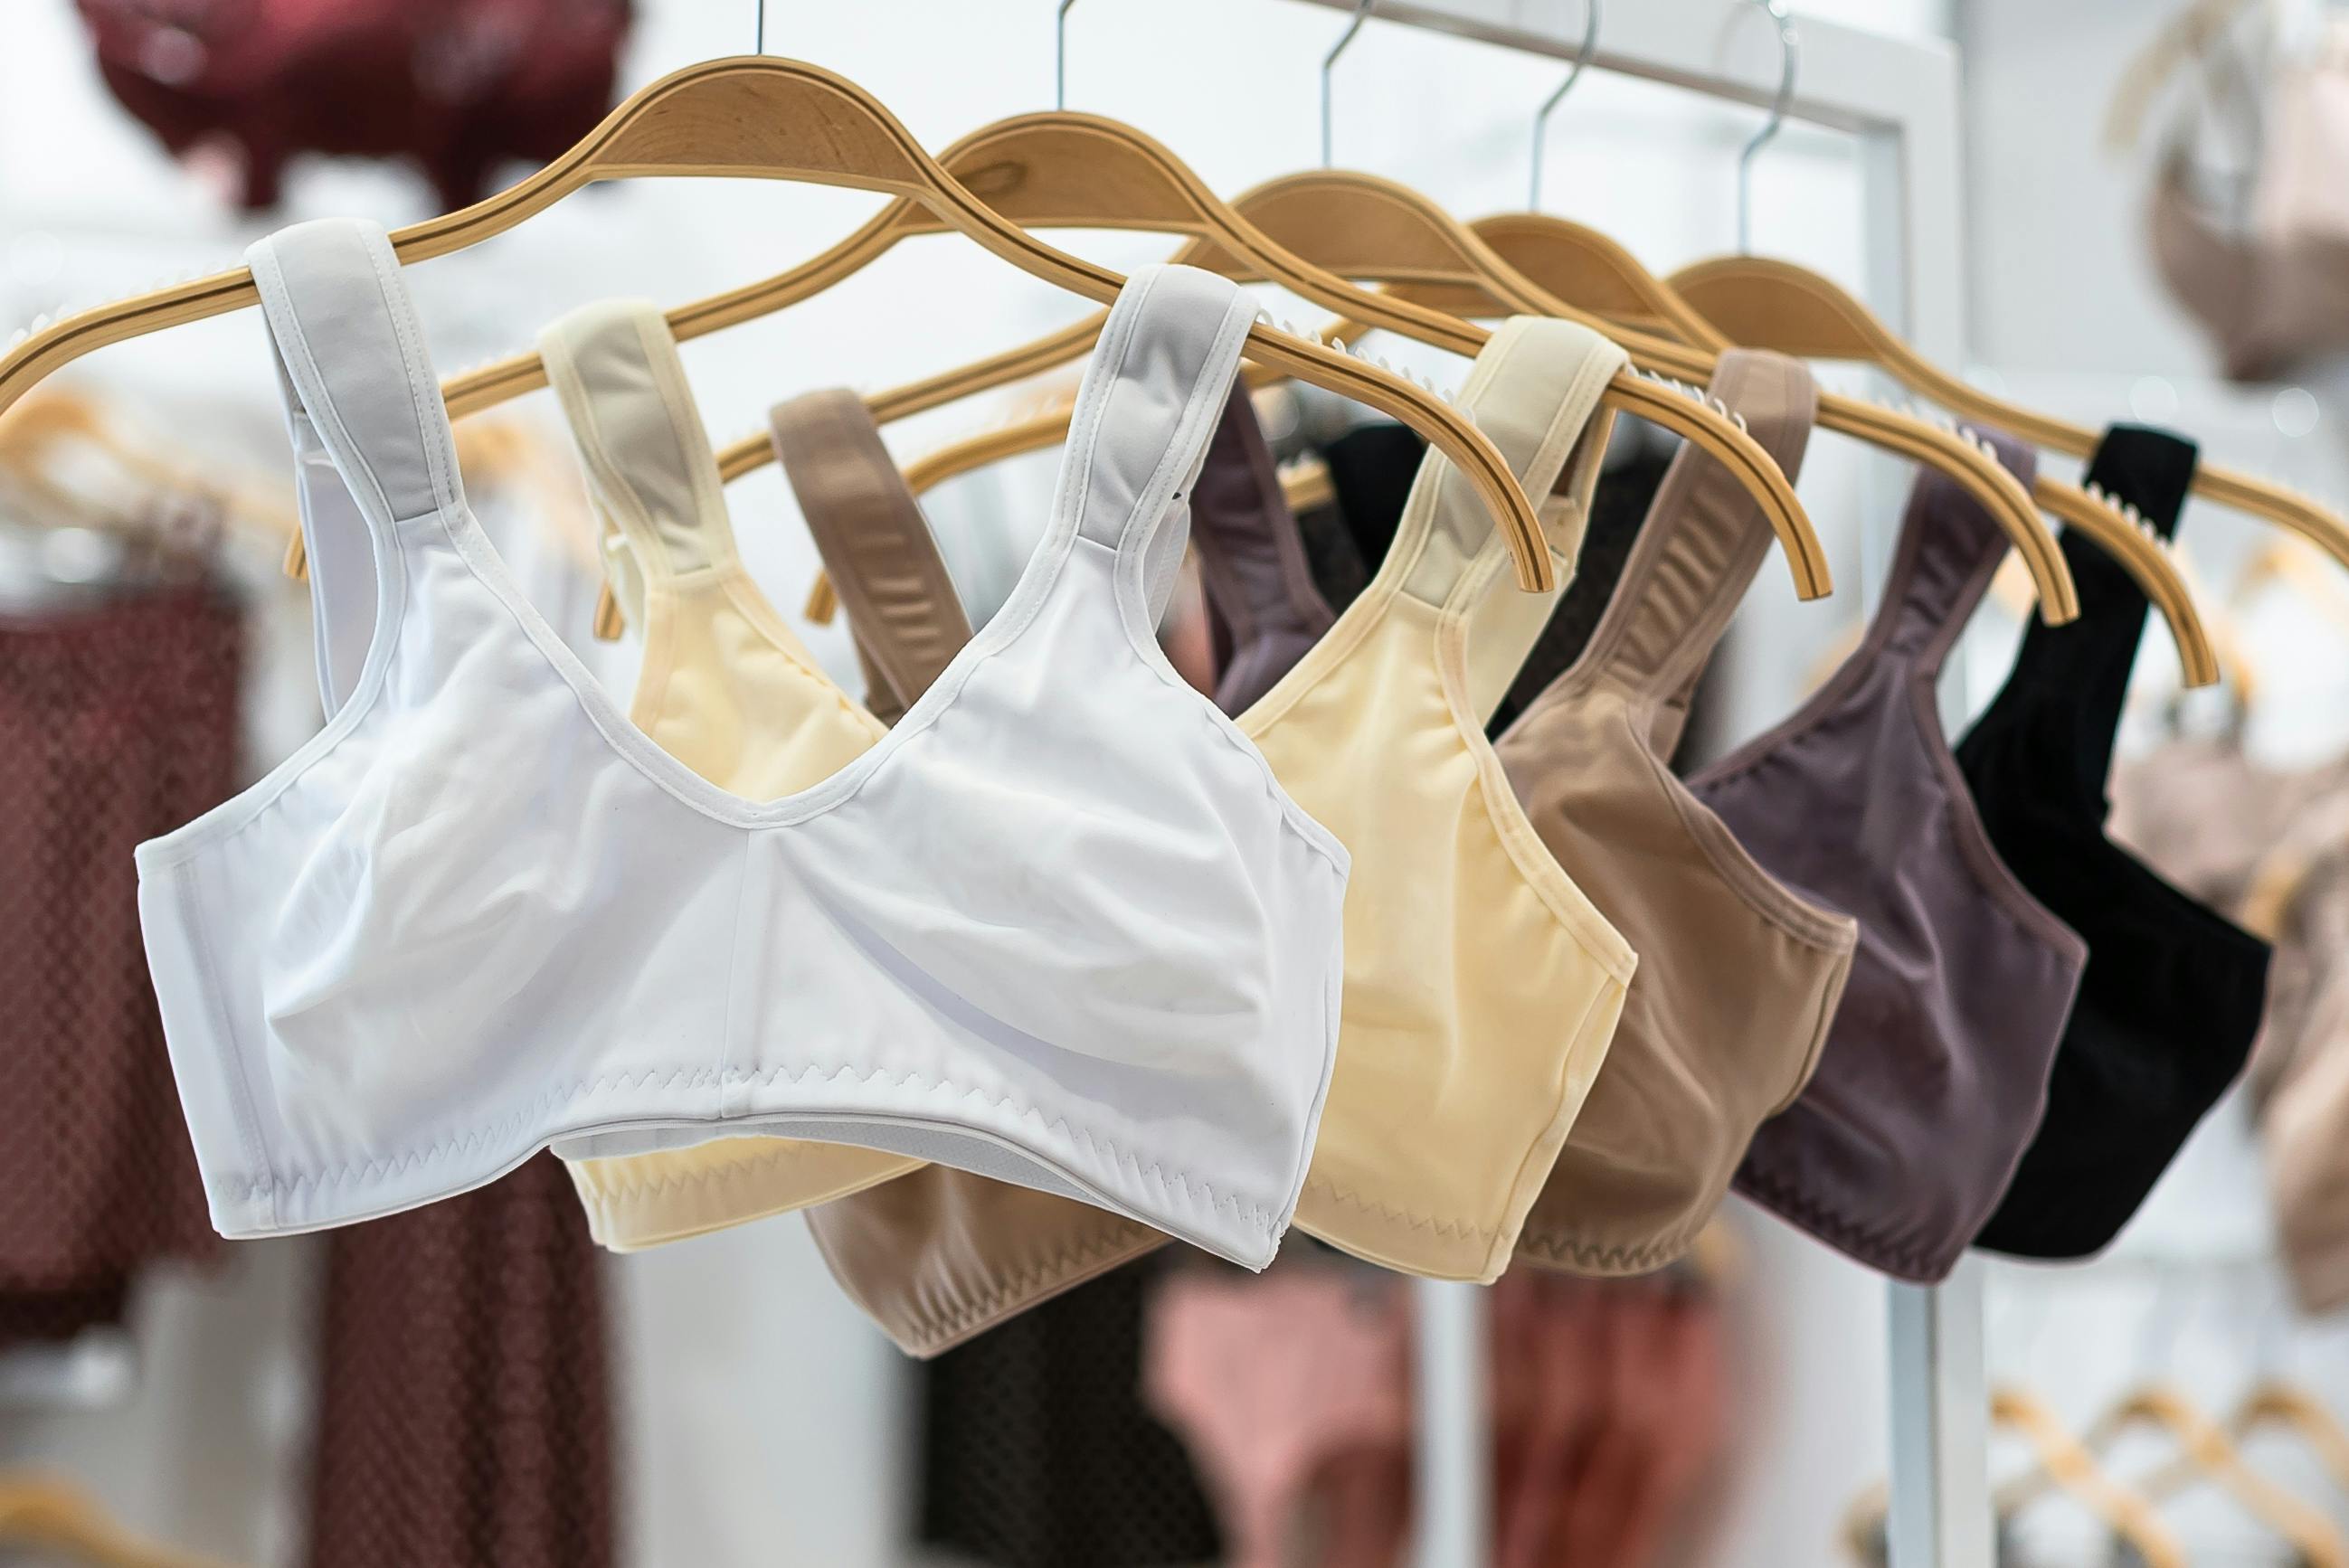 Variety of Sports Bra on Brown Wooden Clothes Hangers · Free Stock